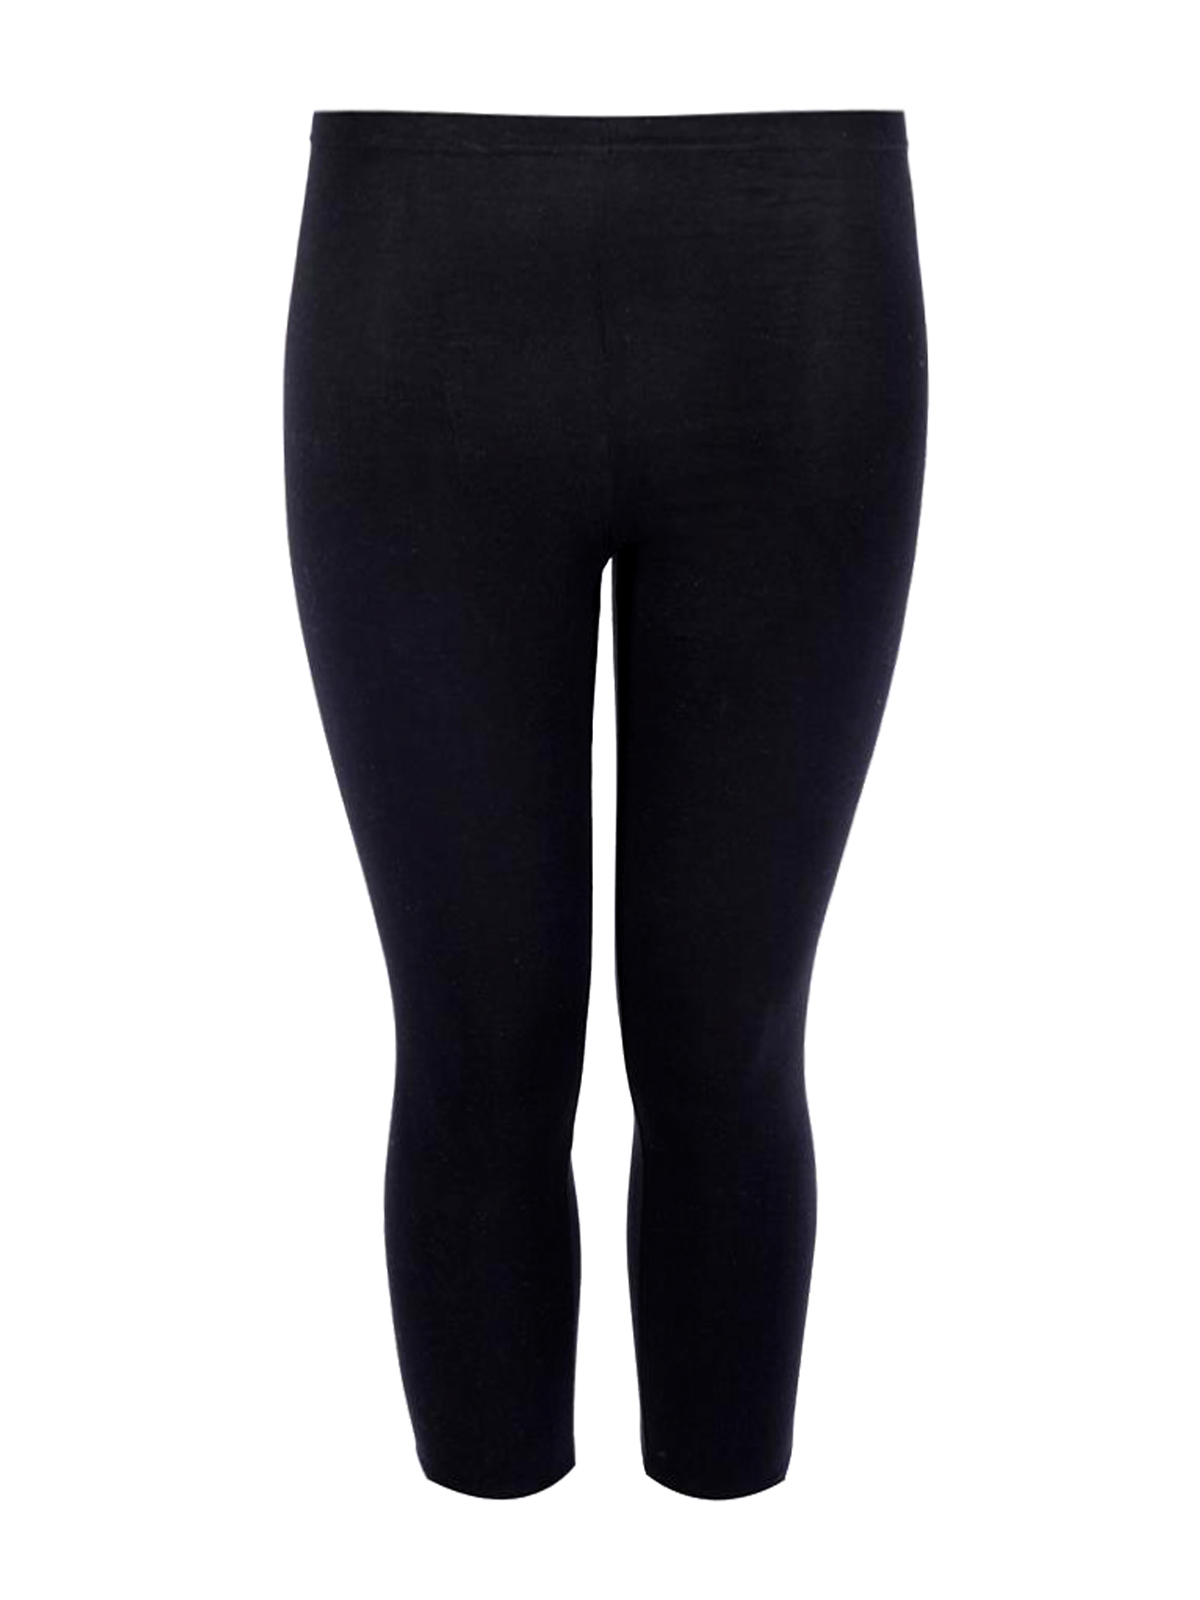 CURVE - - Yours BLACK Cropped Leggings - Plus Size 16 to 28